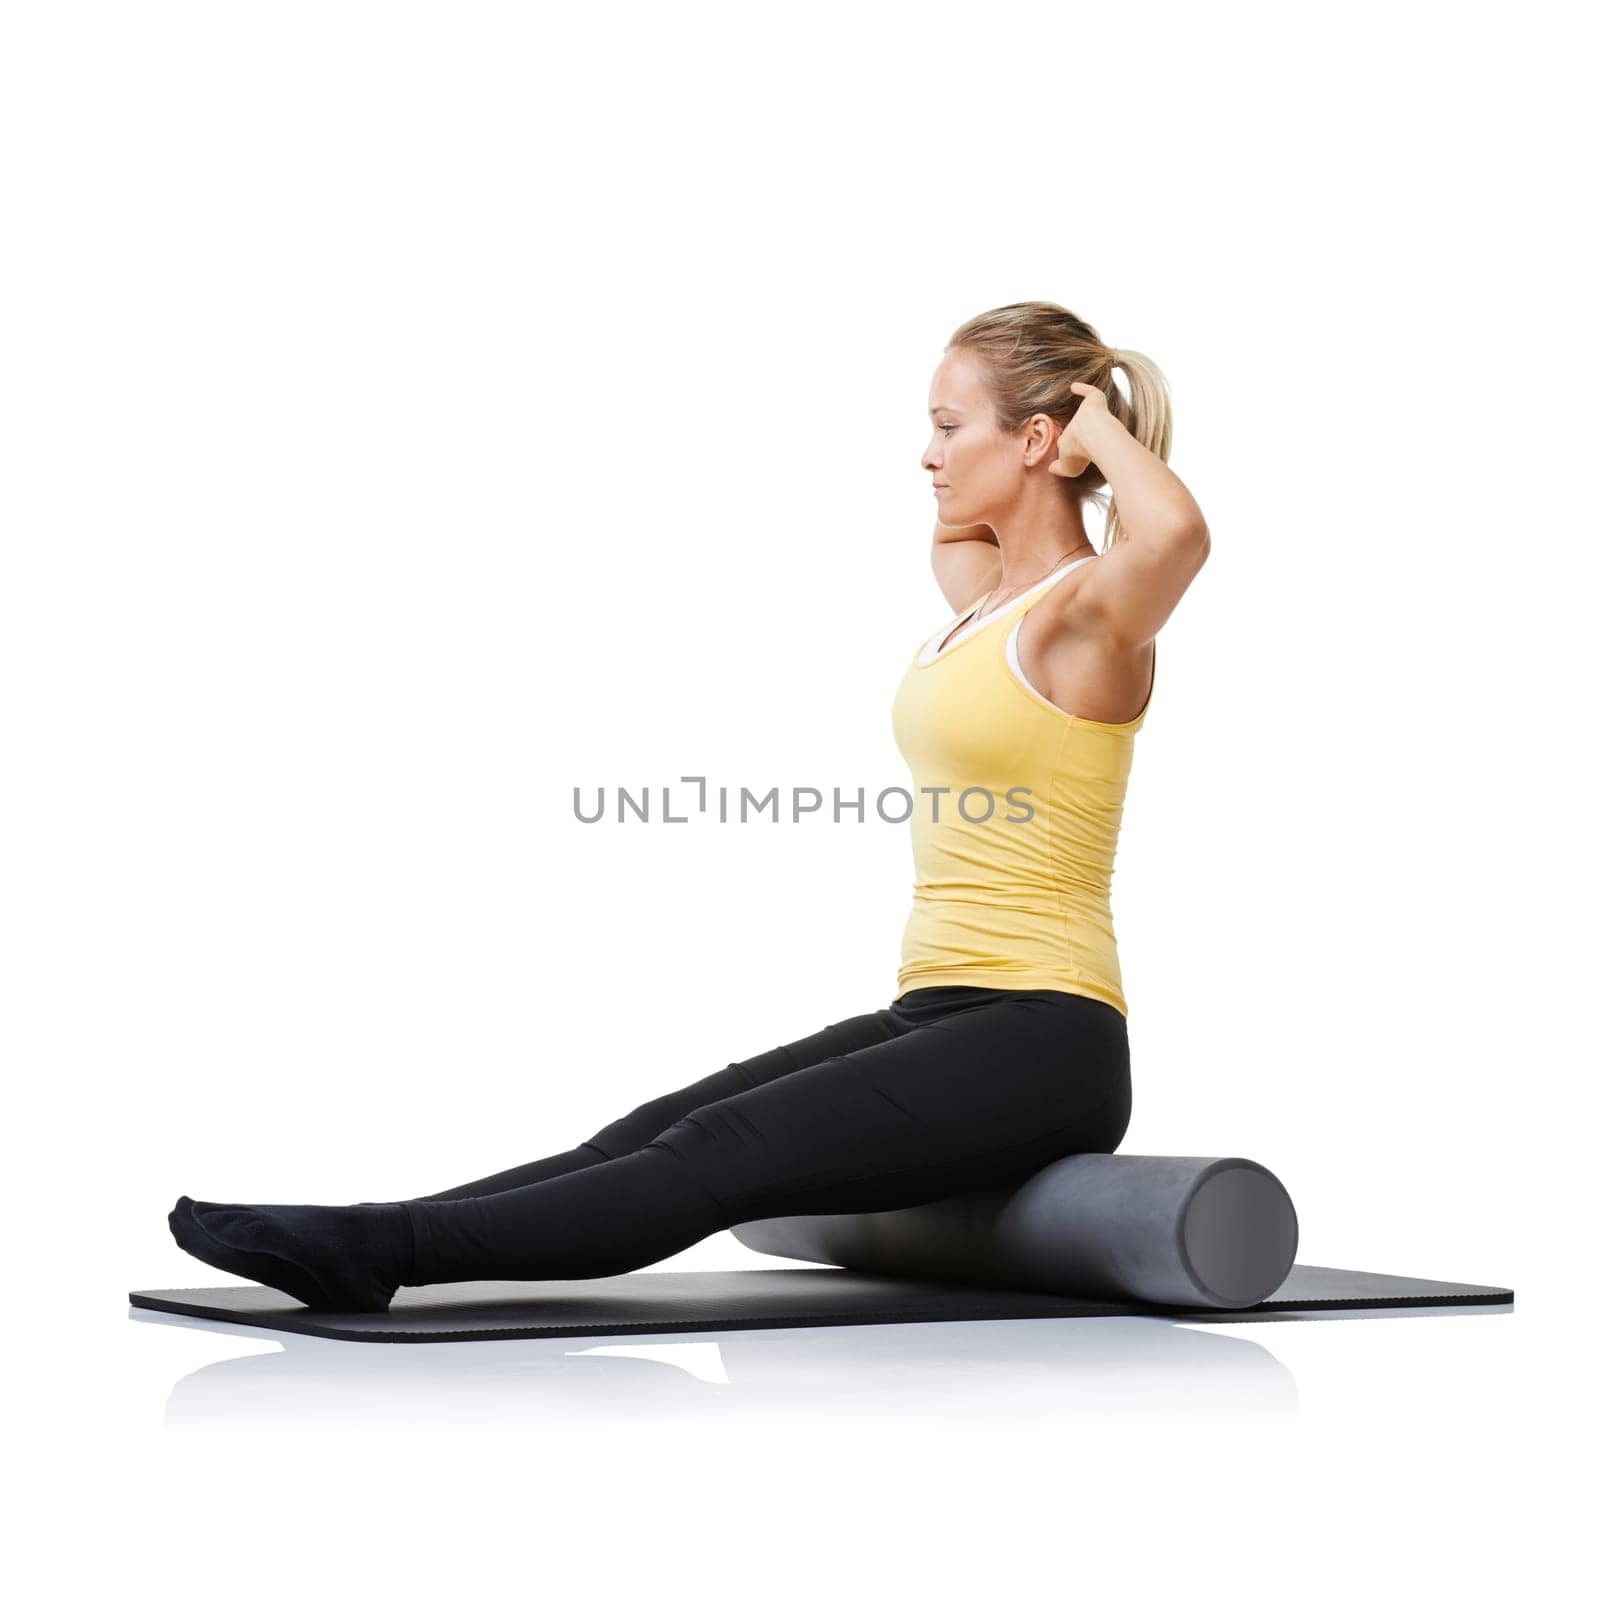 Studio fitness, foam roller and pilates woman with posture training, core wellness challenge or active stretching exercise. Ground, yoga mat and profile of physical activity girl on white background.